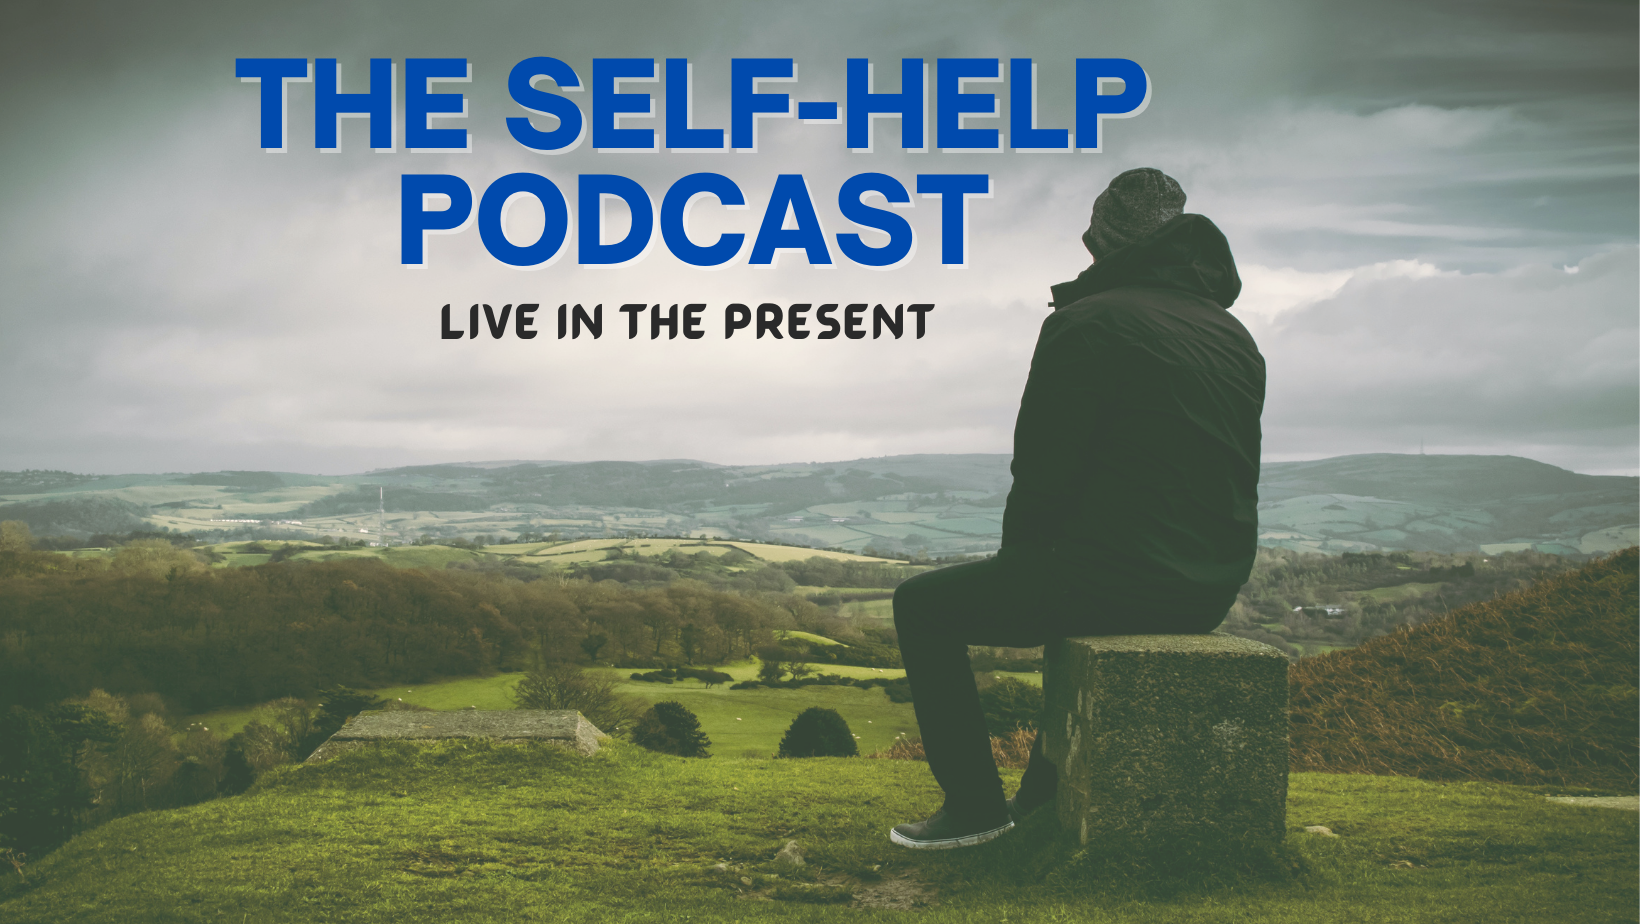 The Self-Help Podcast – Listen Here